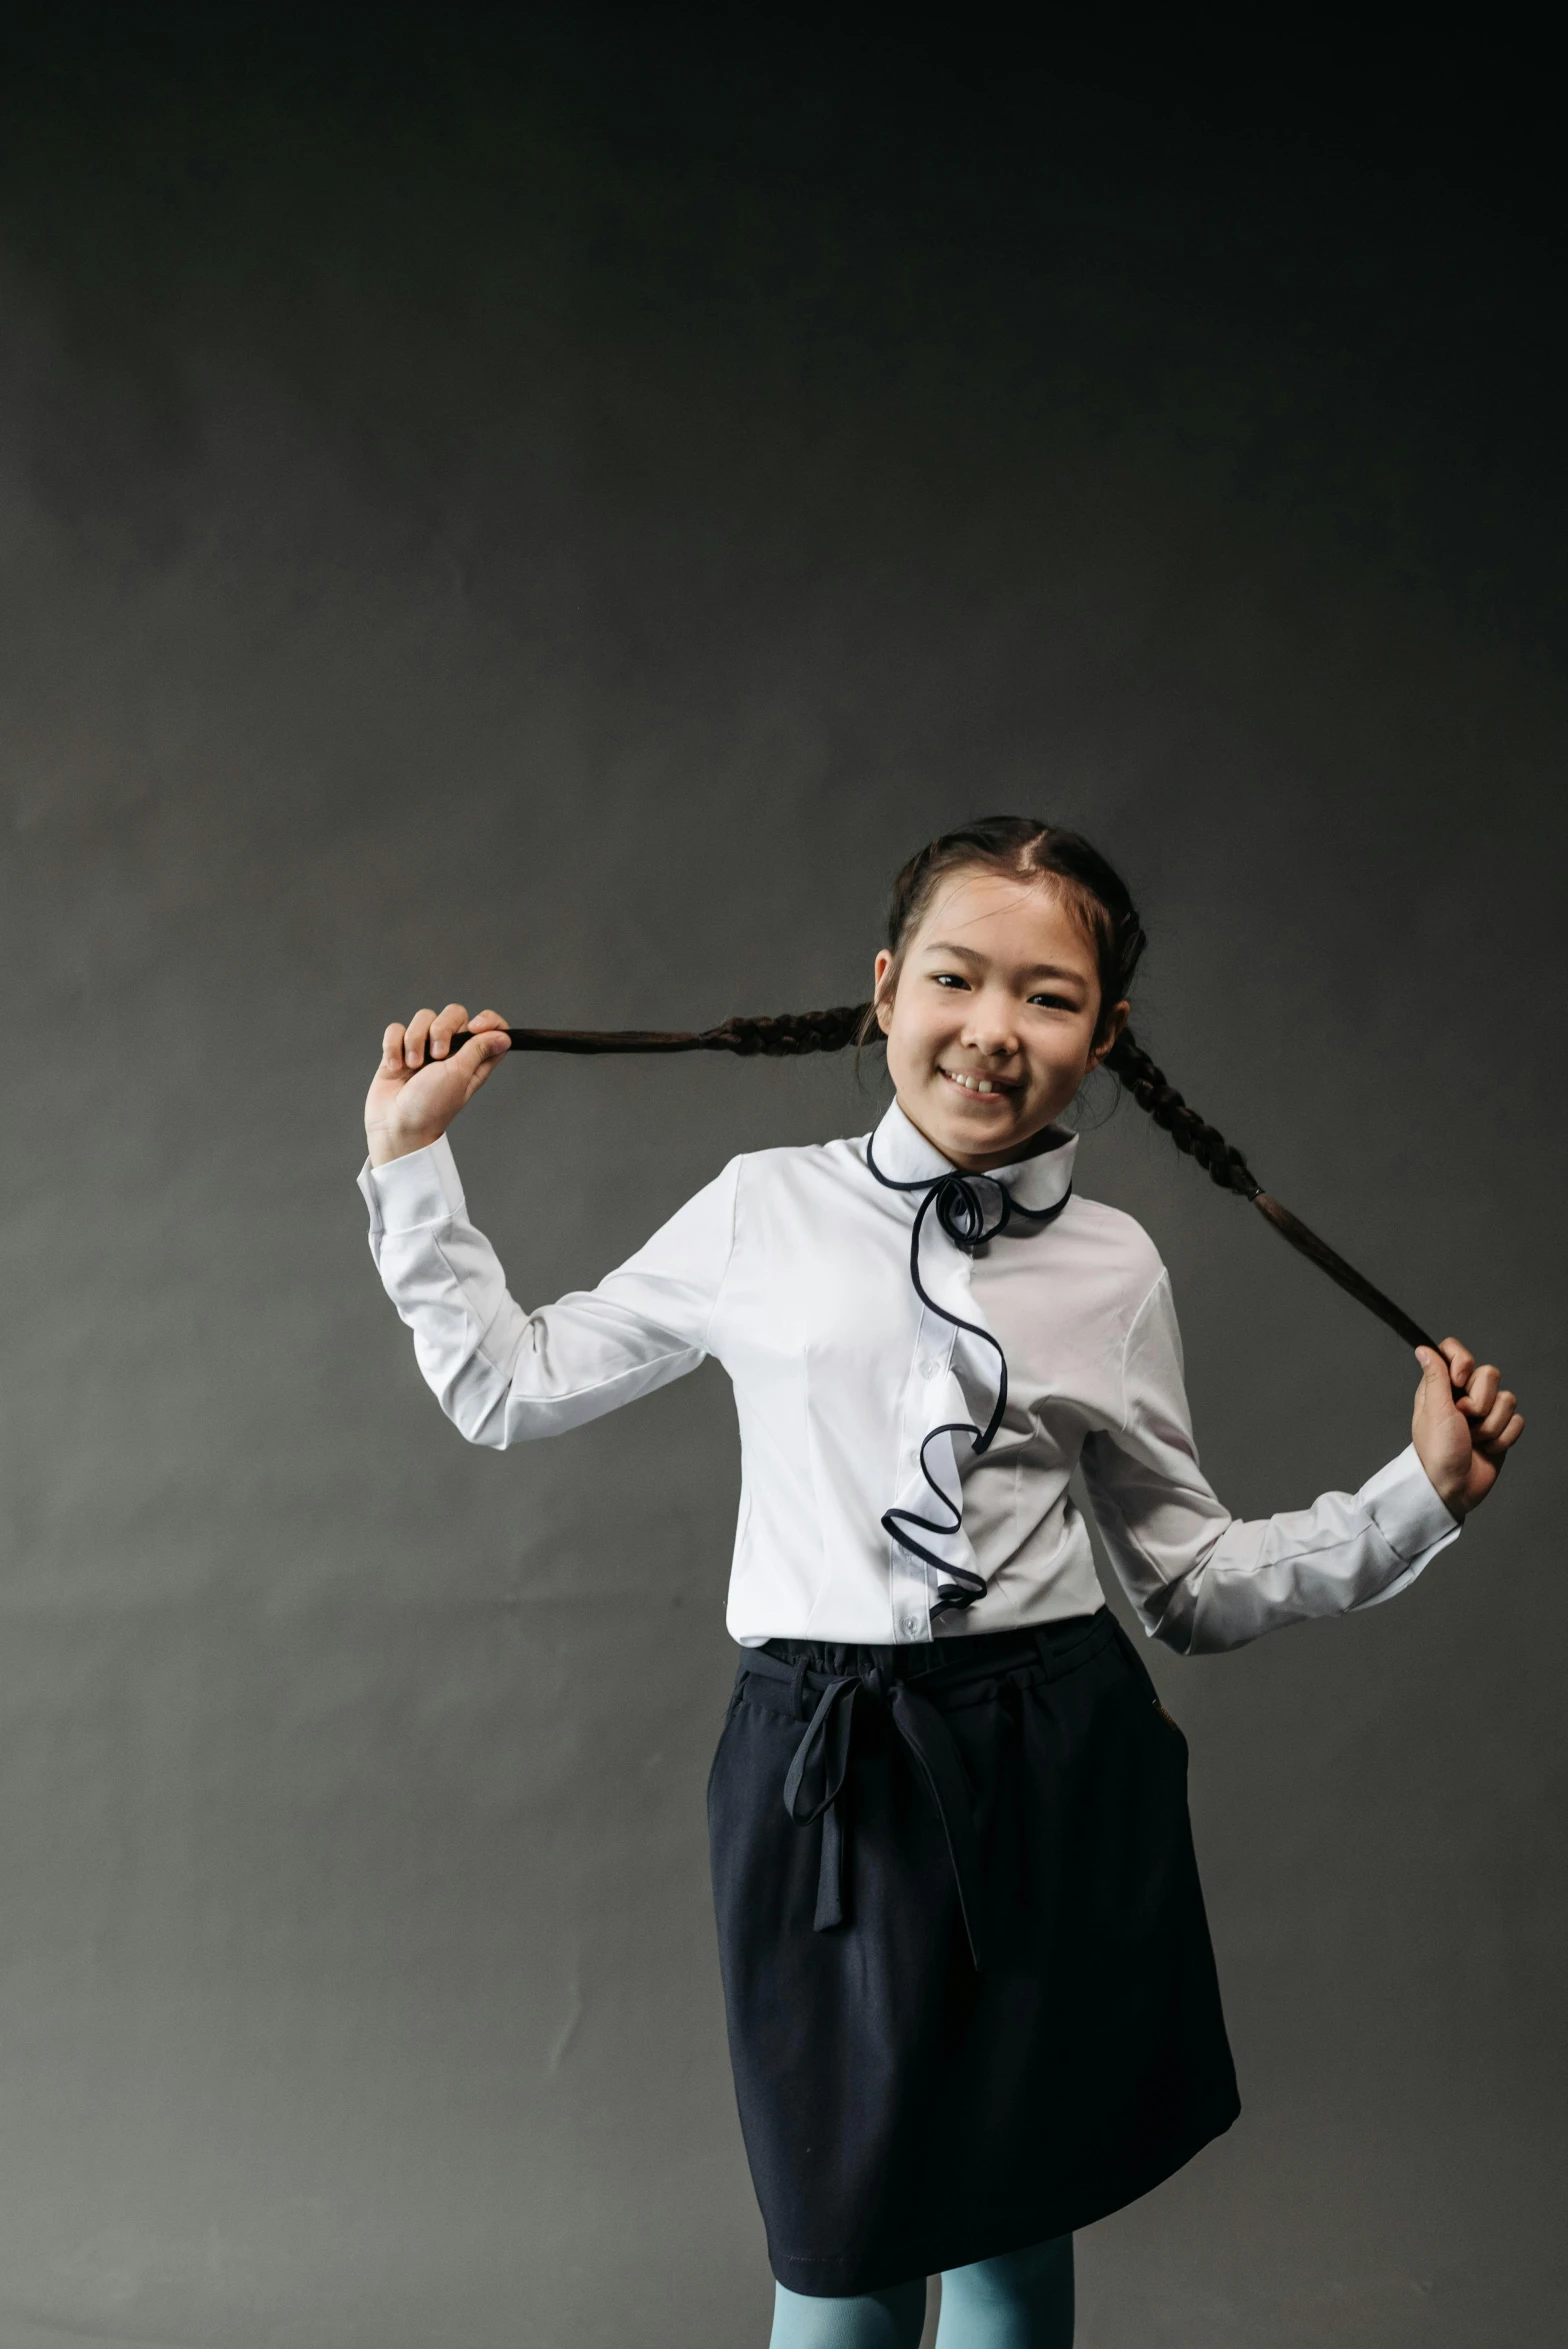 a young girl in a white shirt and black skirt, inspired by Kim Tschang Yeul, pexels contest winner, hair are wired cables, bjork smiling, ribbon in her hair, inuit